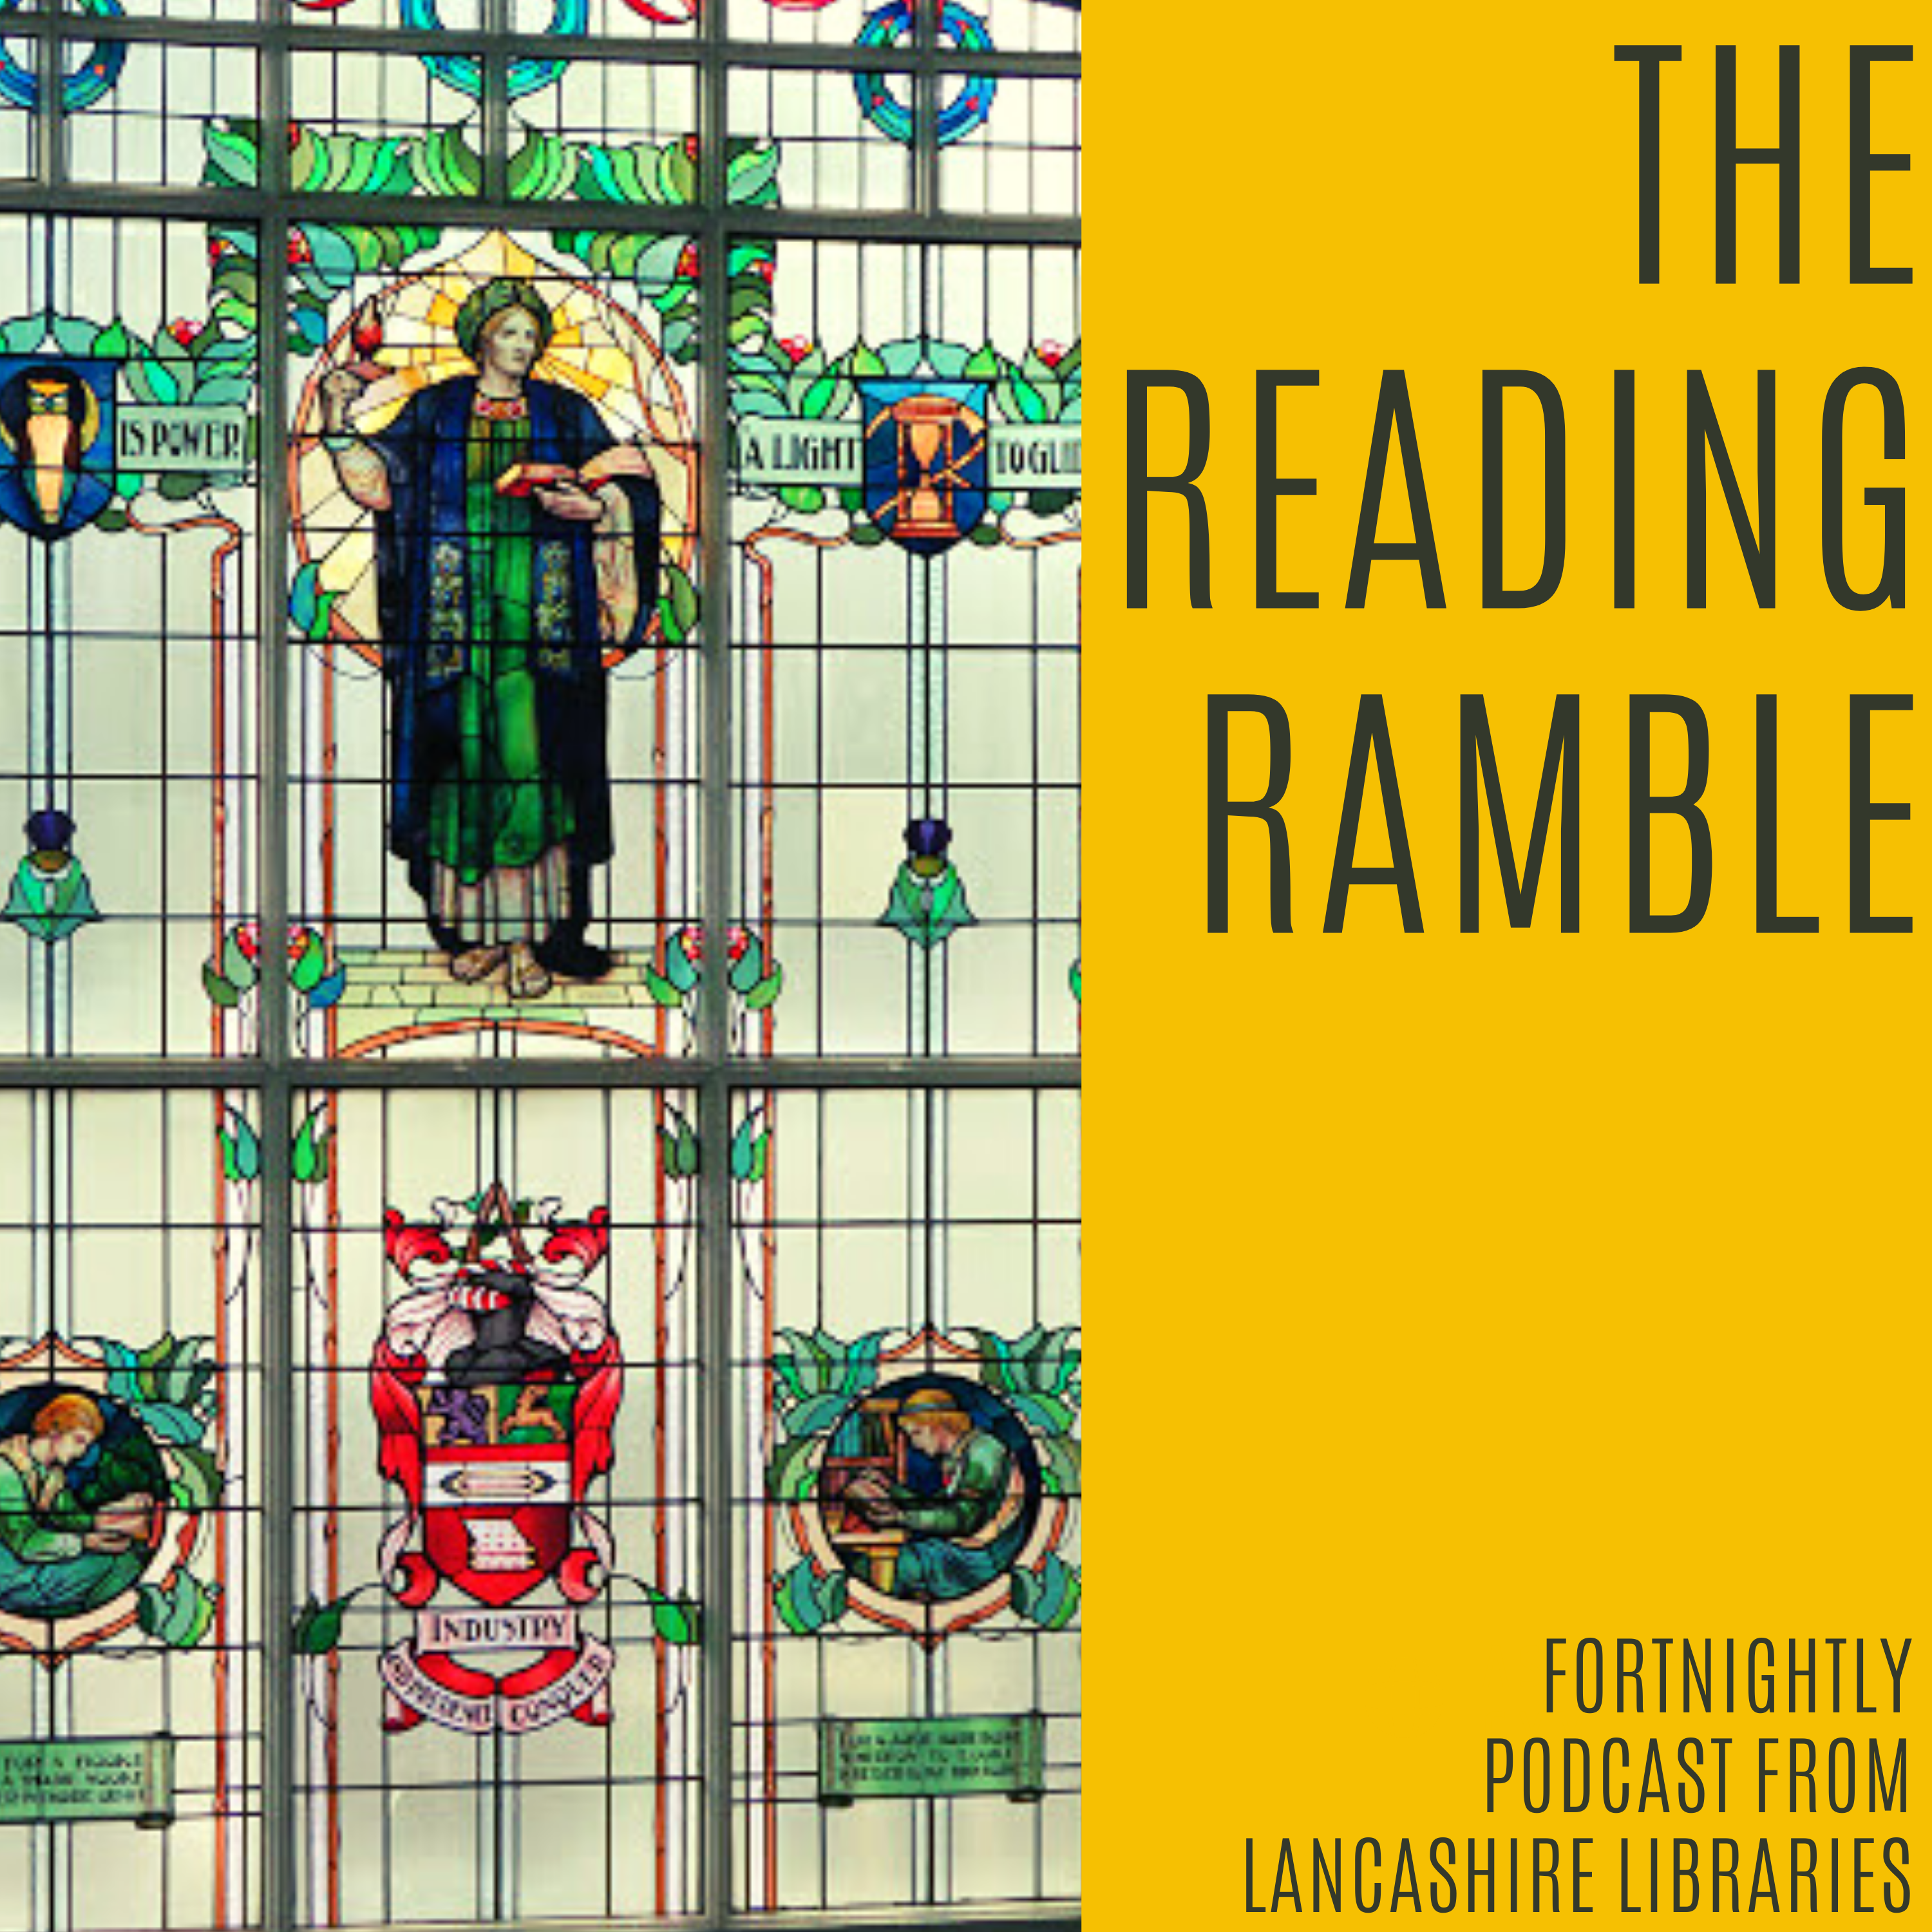 The Reading Ramble podcast